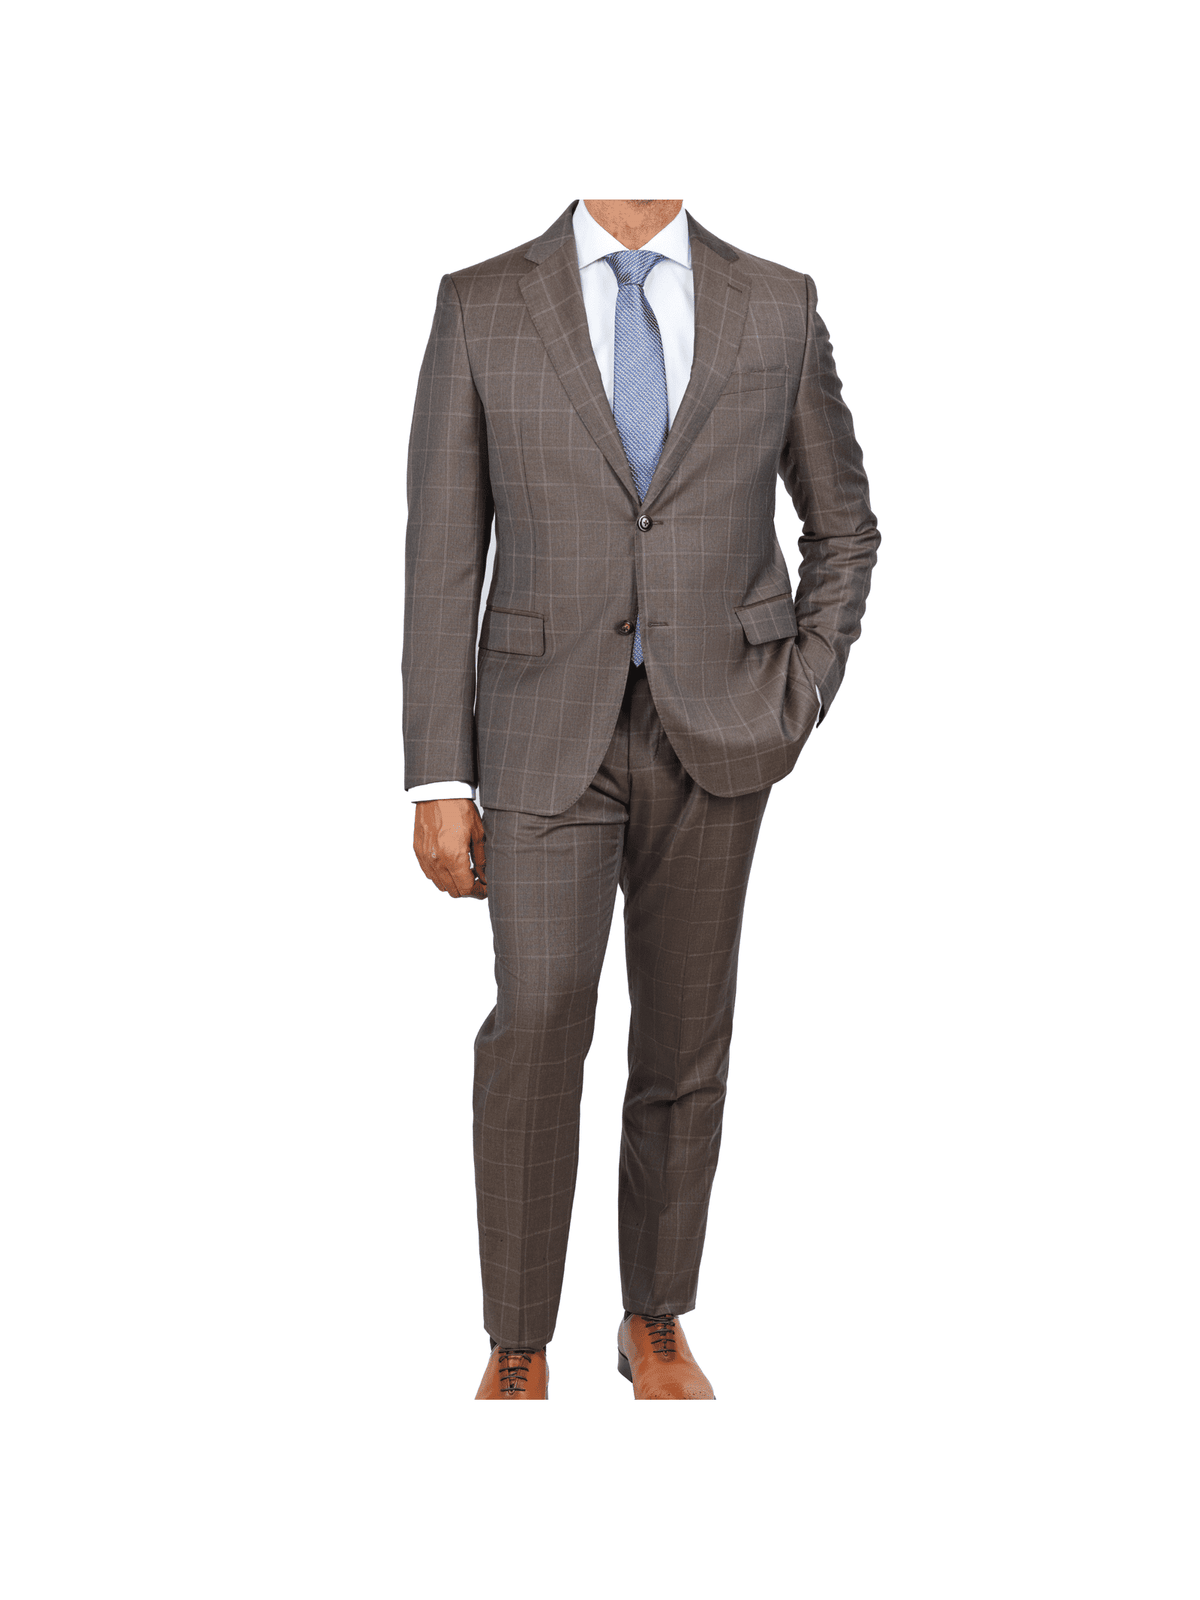 Italiano SUITS Italiano Mens Brown Check 100% Zegna Wool Slim Fit 2 Button Suit